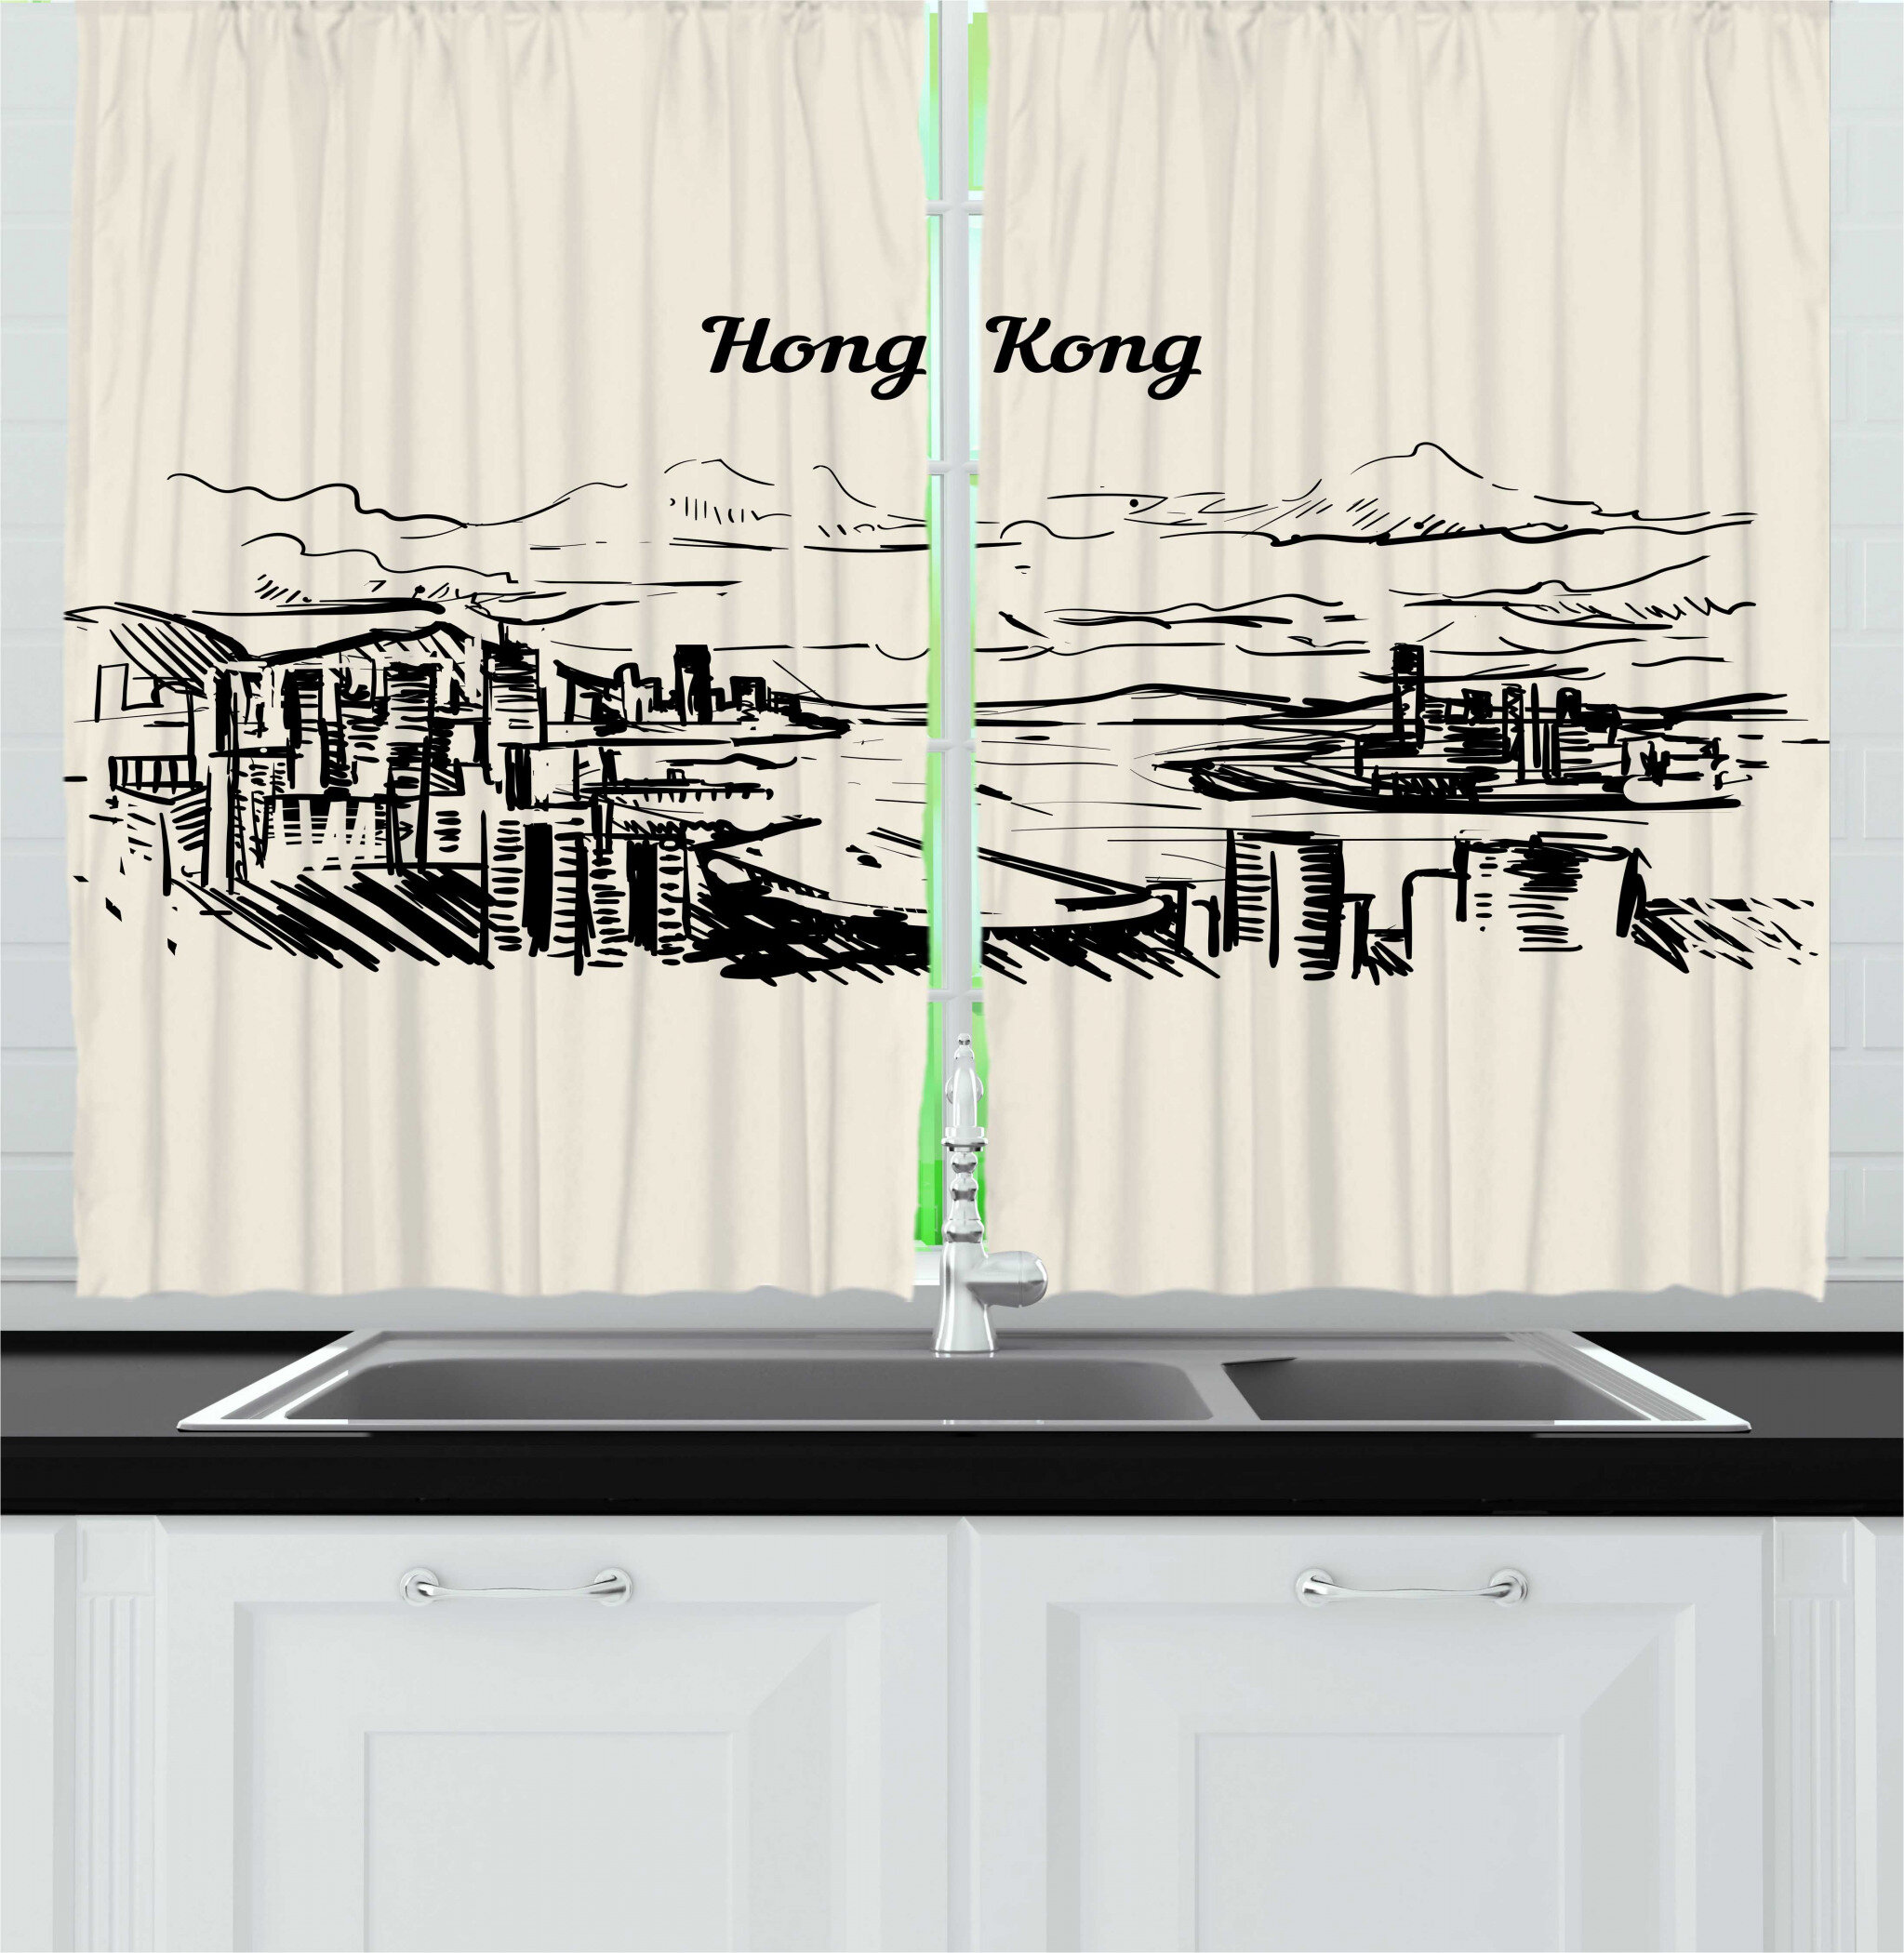 East Urban Home 2 Piece Travel Hong Kong Typography And Skyline Drawn By Hand In Monochrome Style Kitchen Curtain Set Wayfair